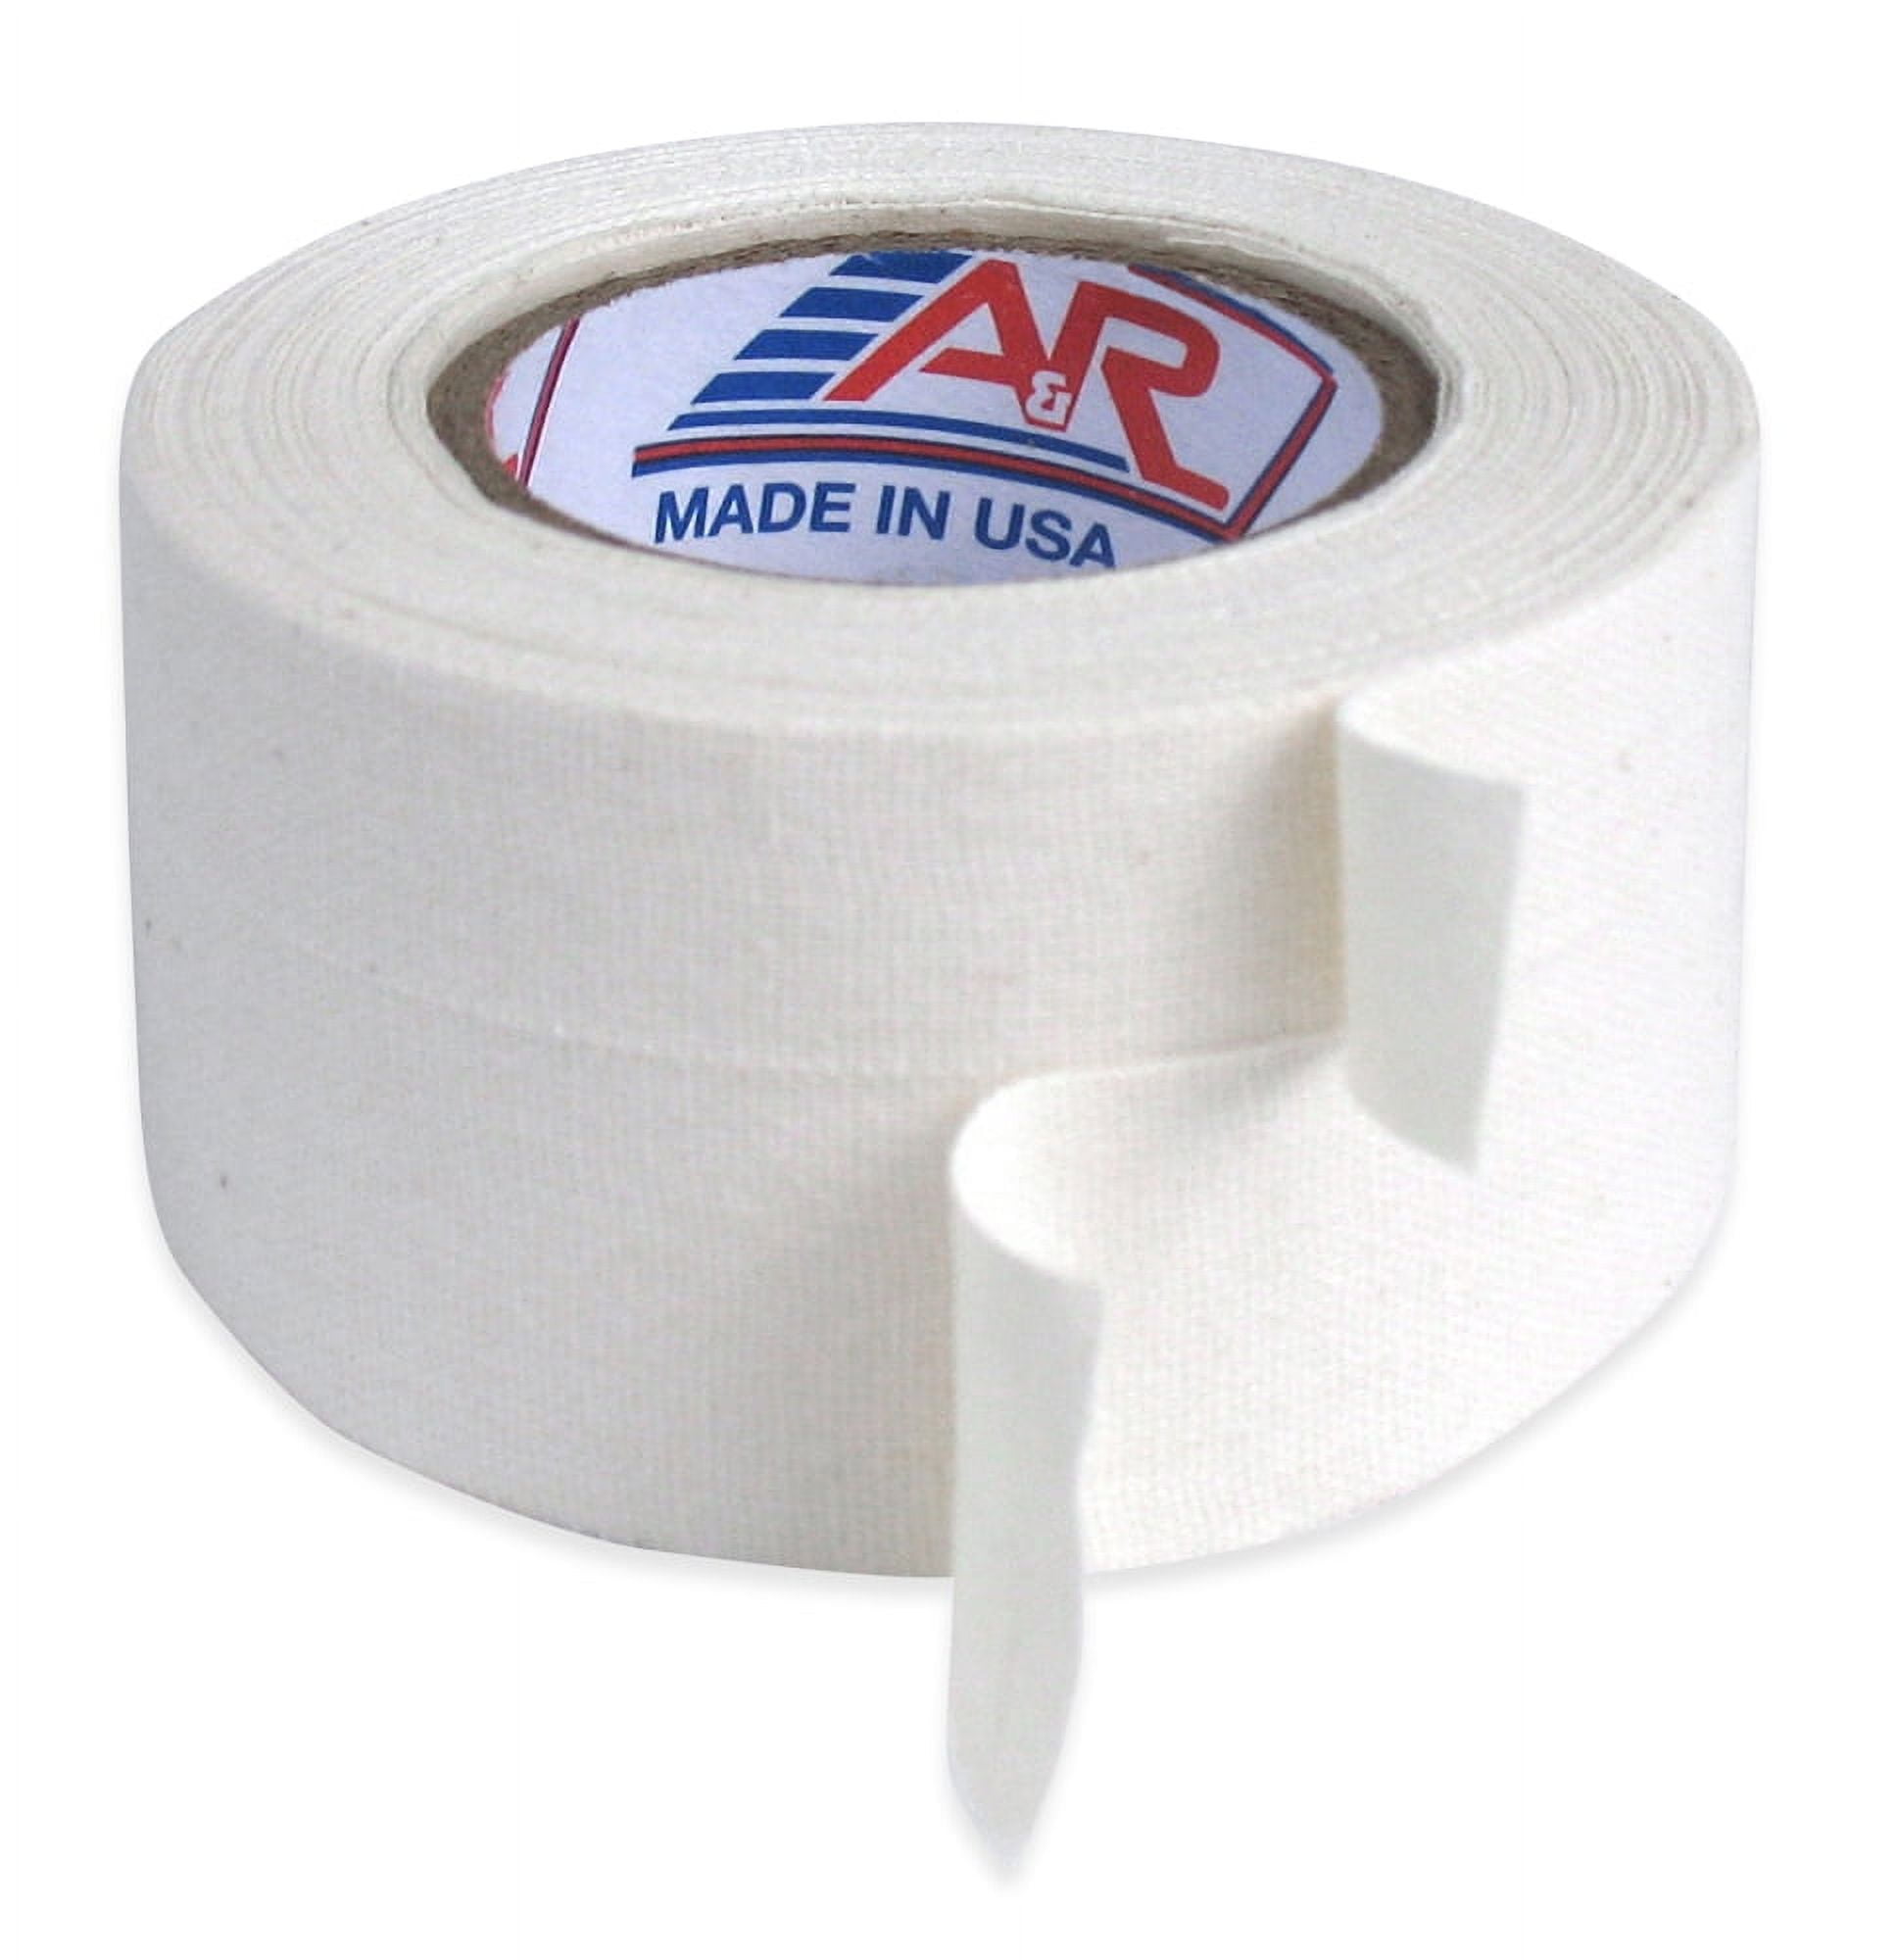 Stick Tape | Tape from Universal Lacrosse